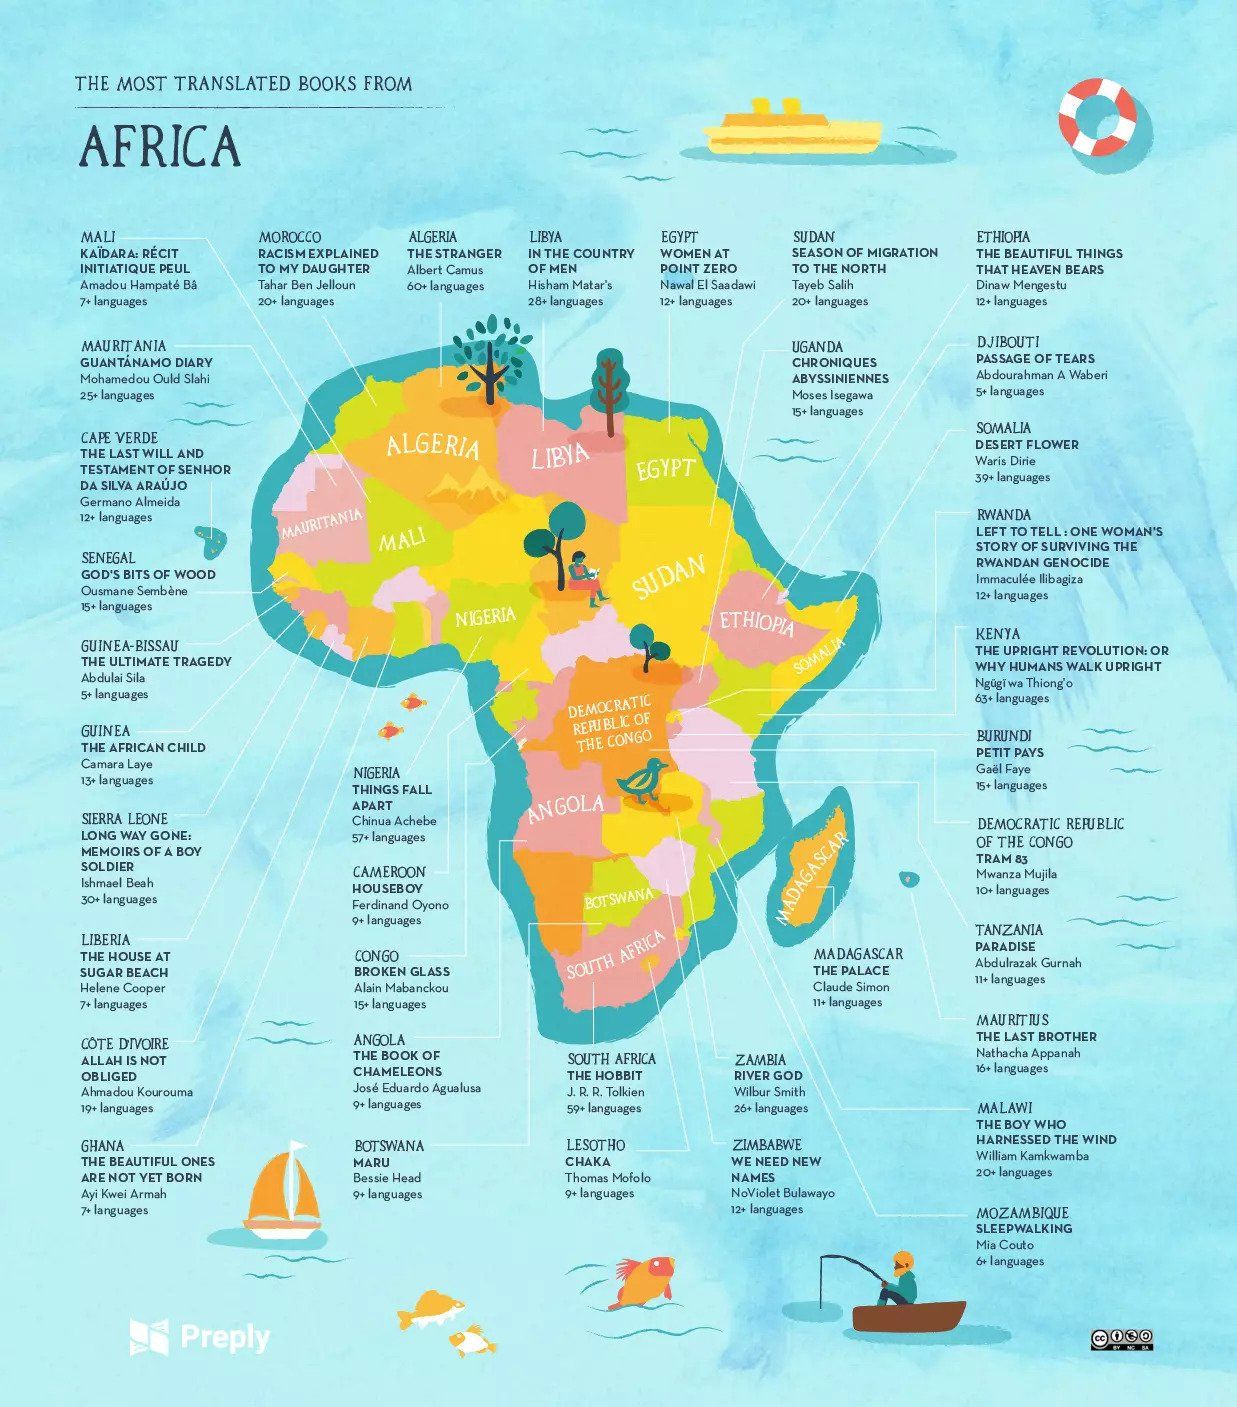 most translated books from Africa map